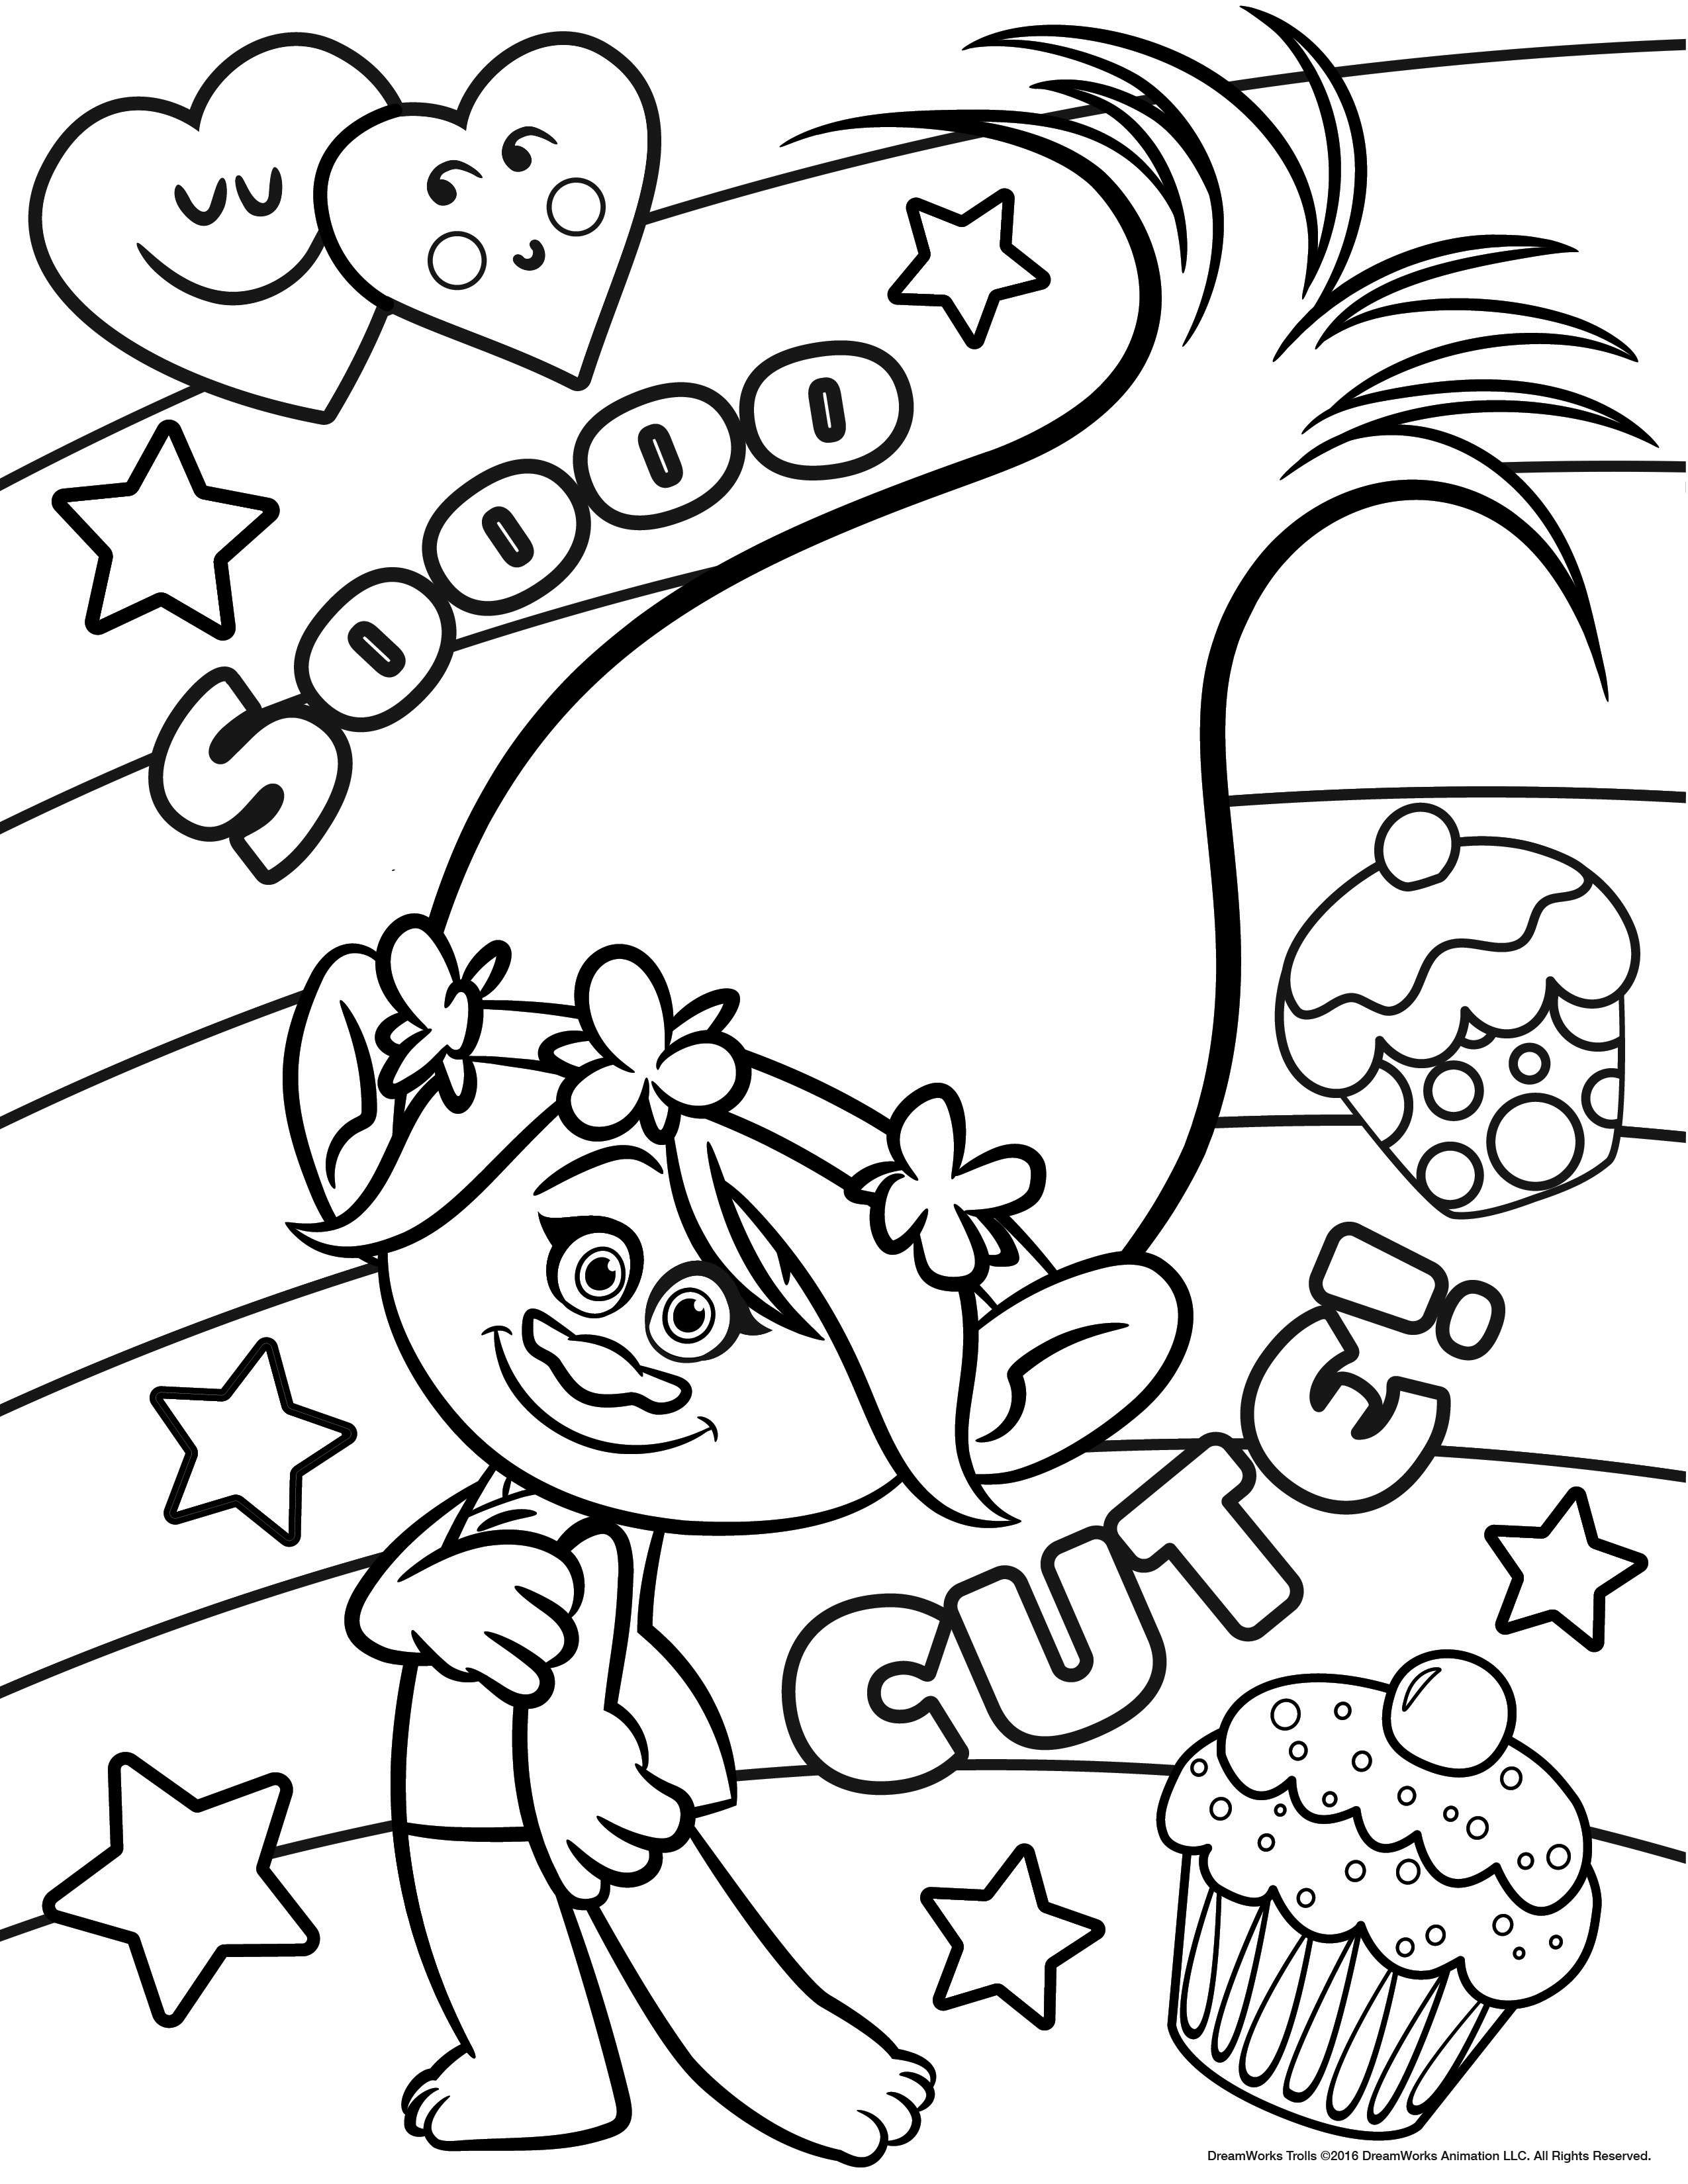 trolls-to-print-for-free-trolls-kids-coloring-pages